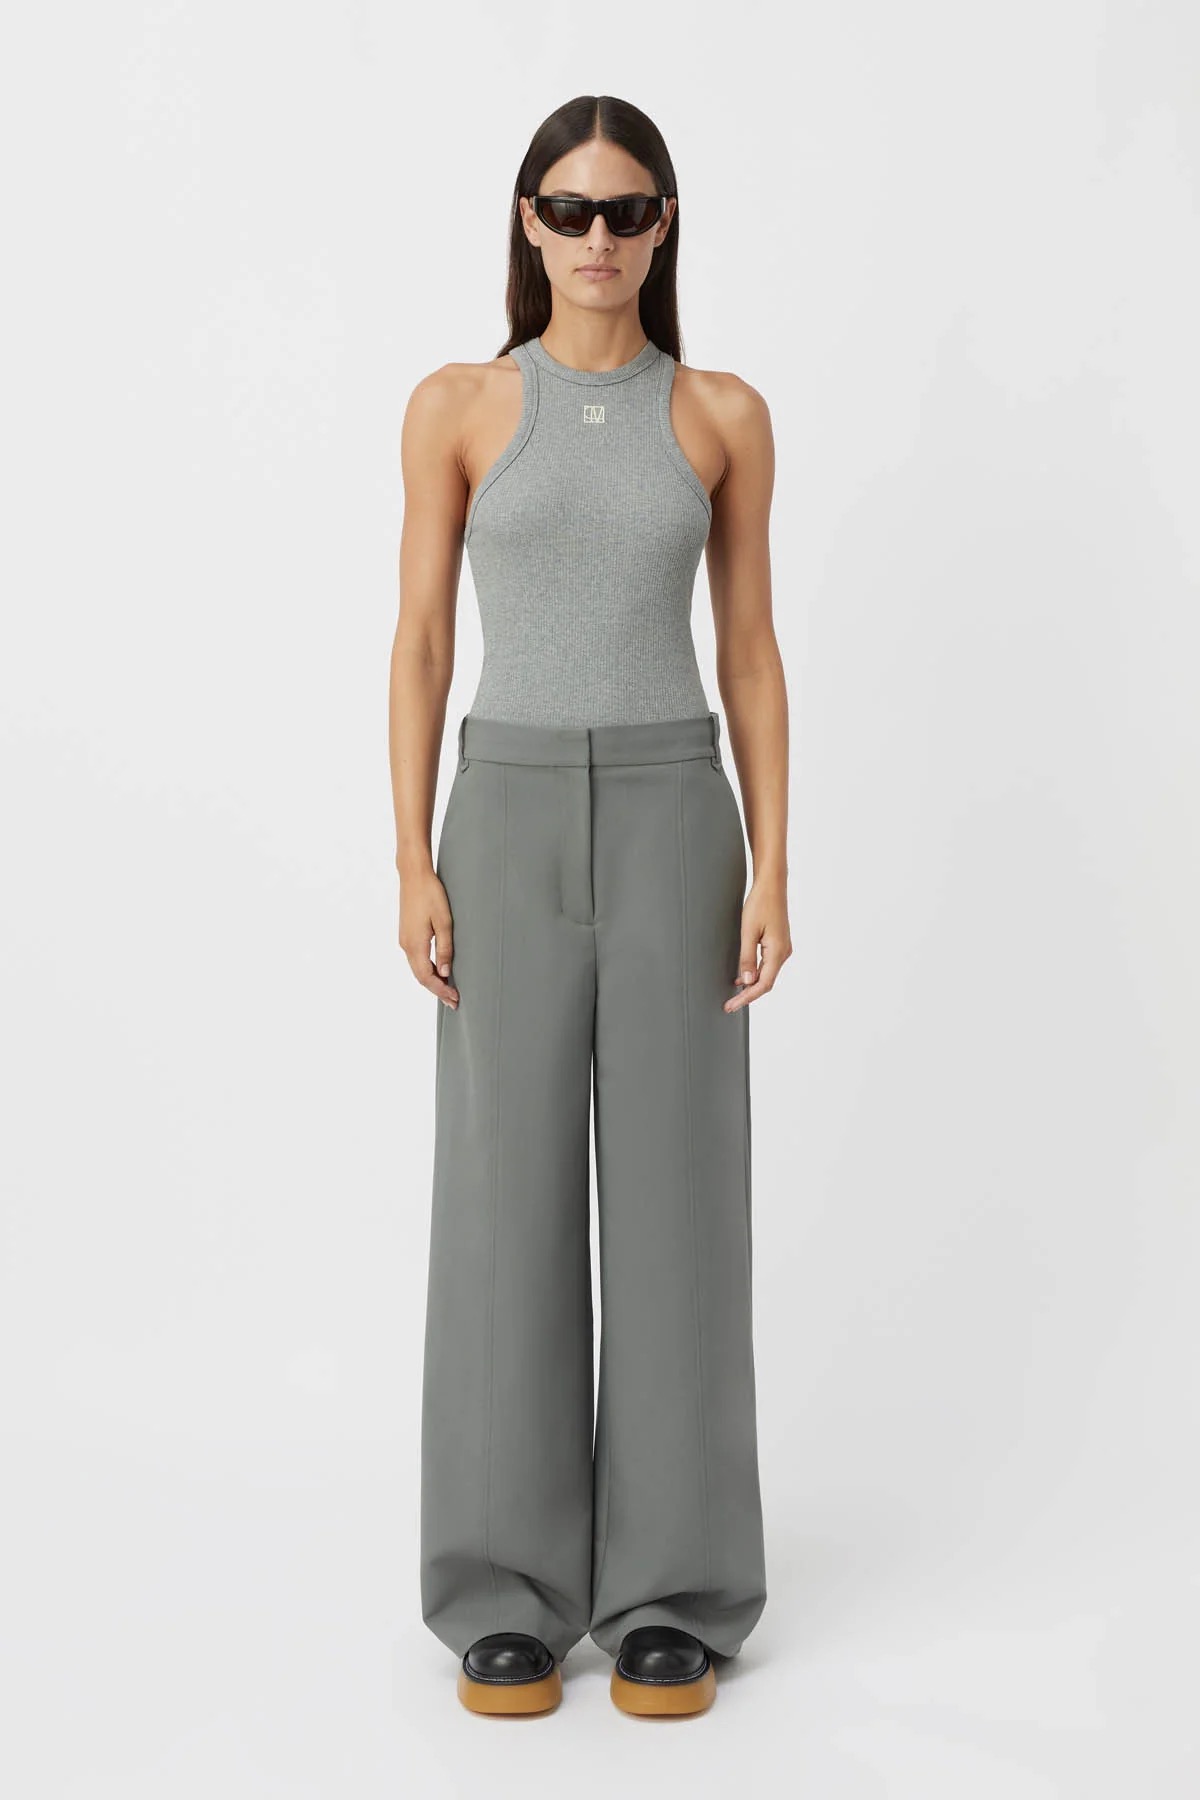 Hose Patterson in steel grey, CAMILLA AND MARC,